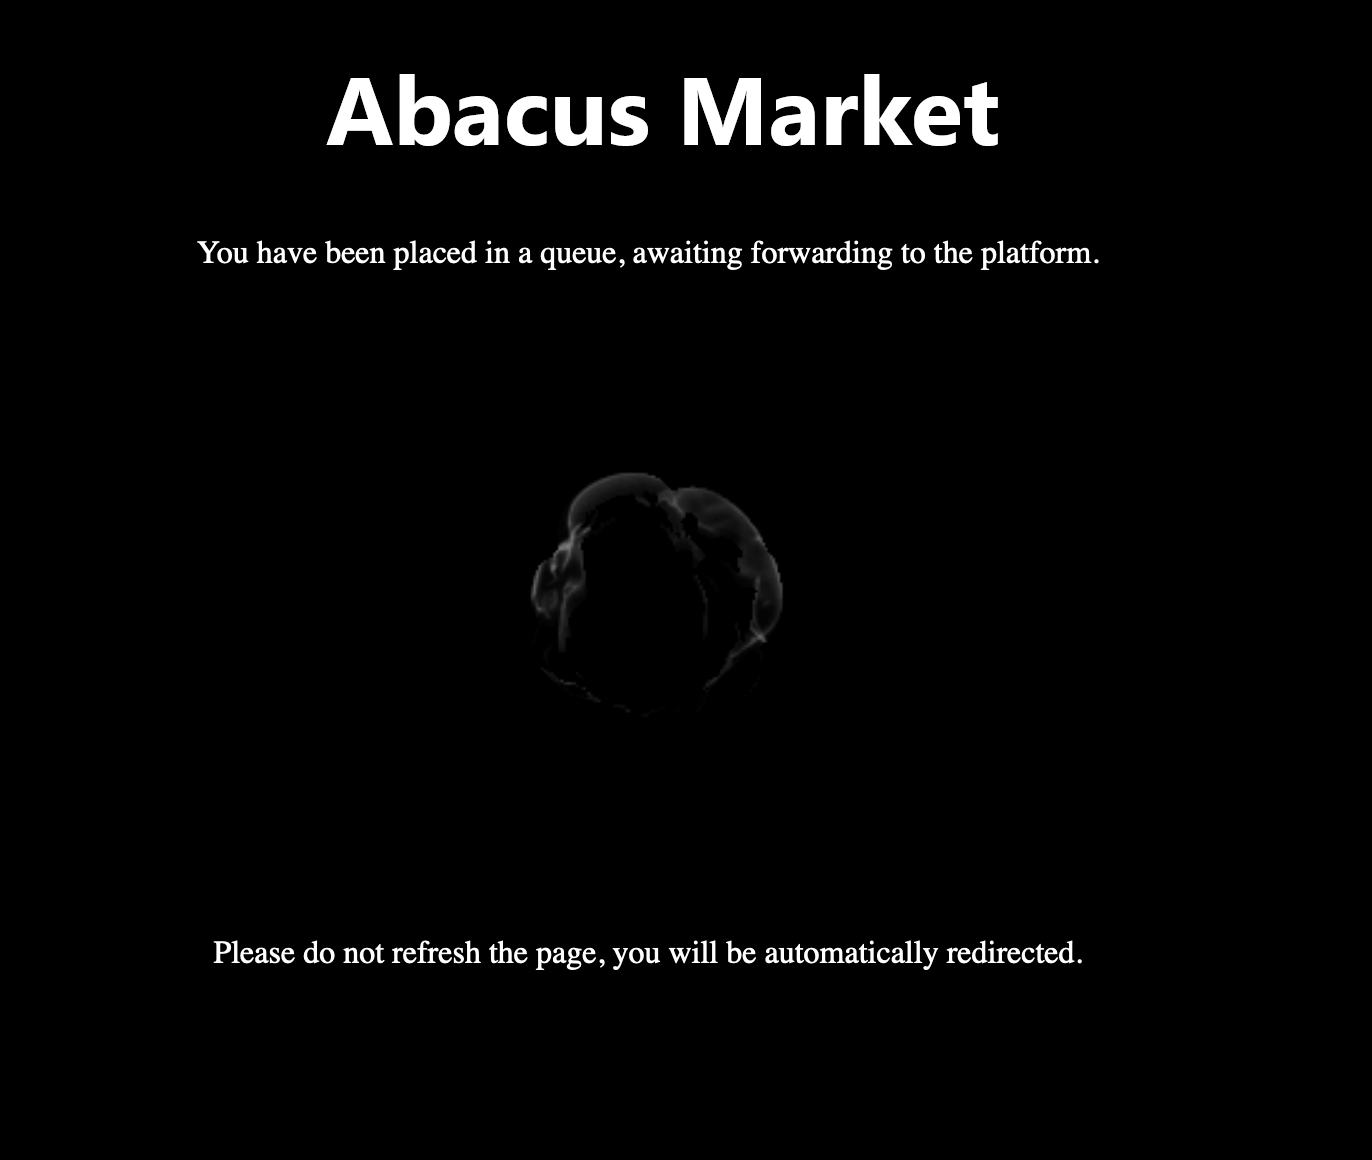 Contact Abacus Market